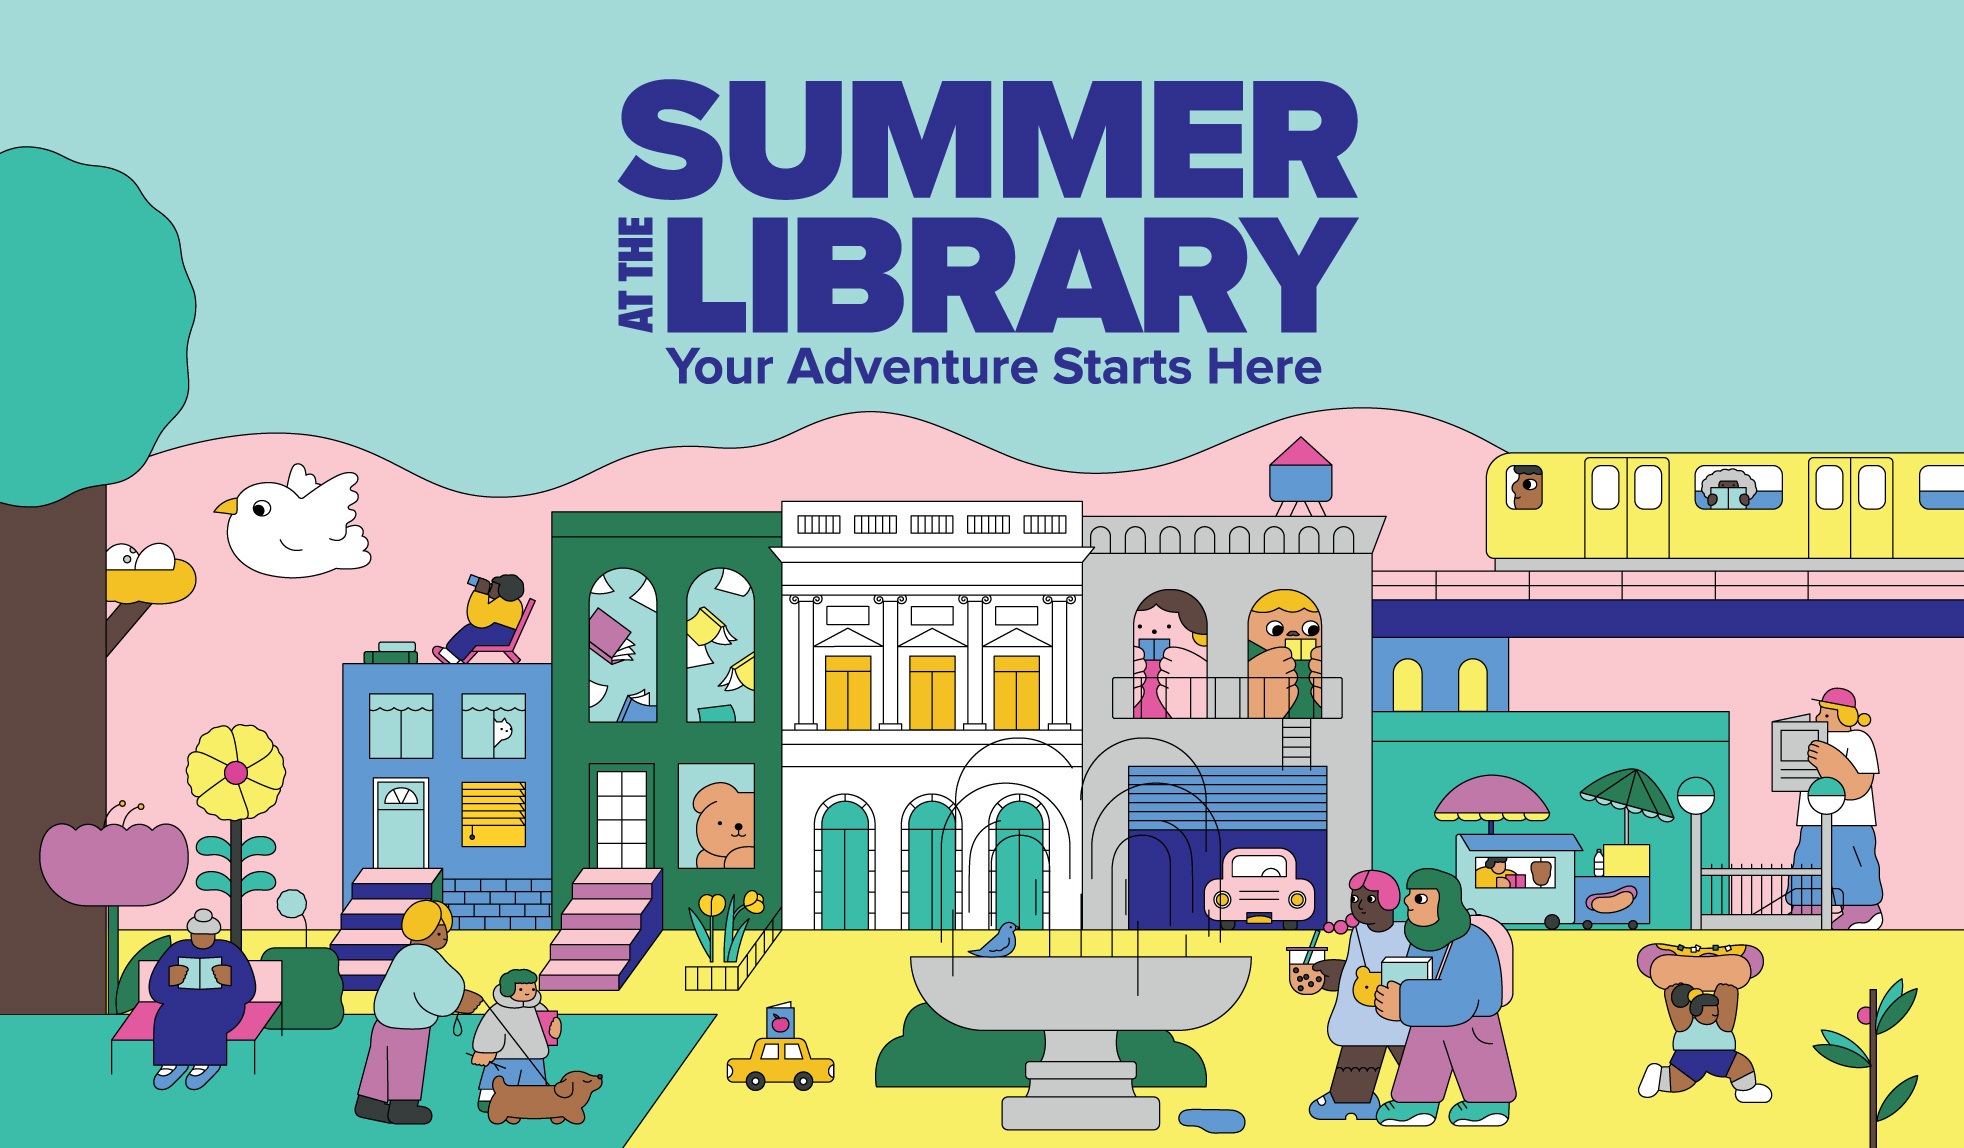 Summer Reading at QPL includes a wide range of books, resources and activities for kids and adults!